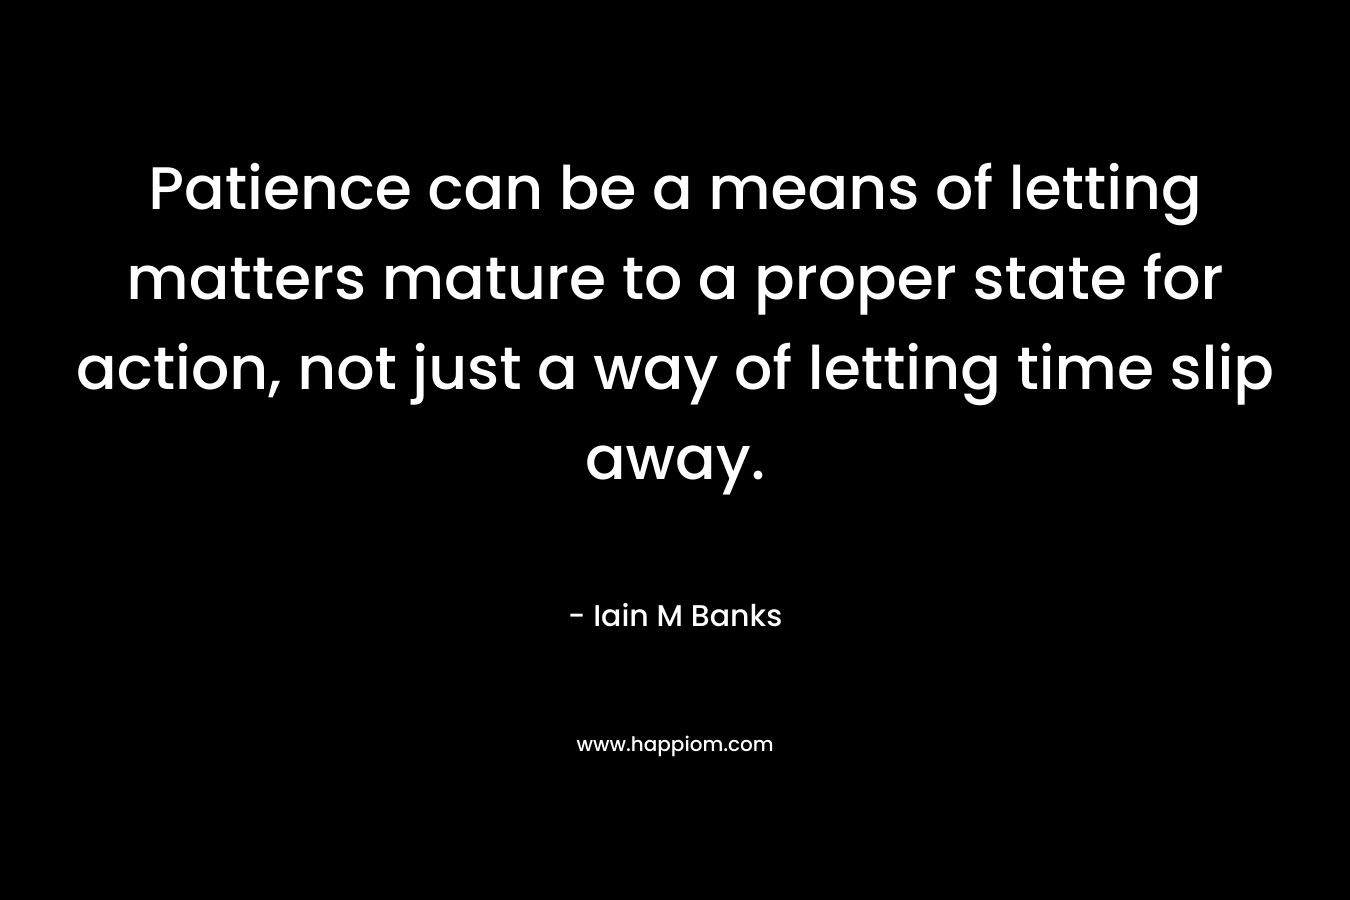 Patience can be a means of letting matters mature to a proper state for action, not just a way of letting time slip away.